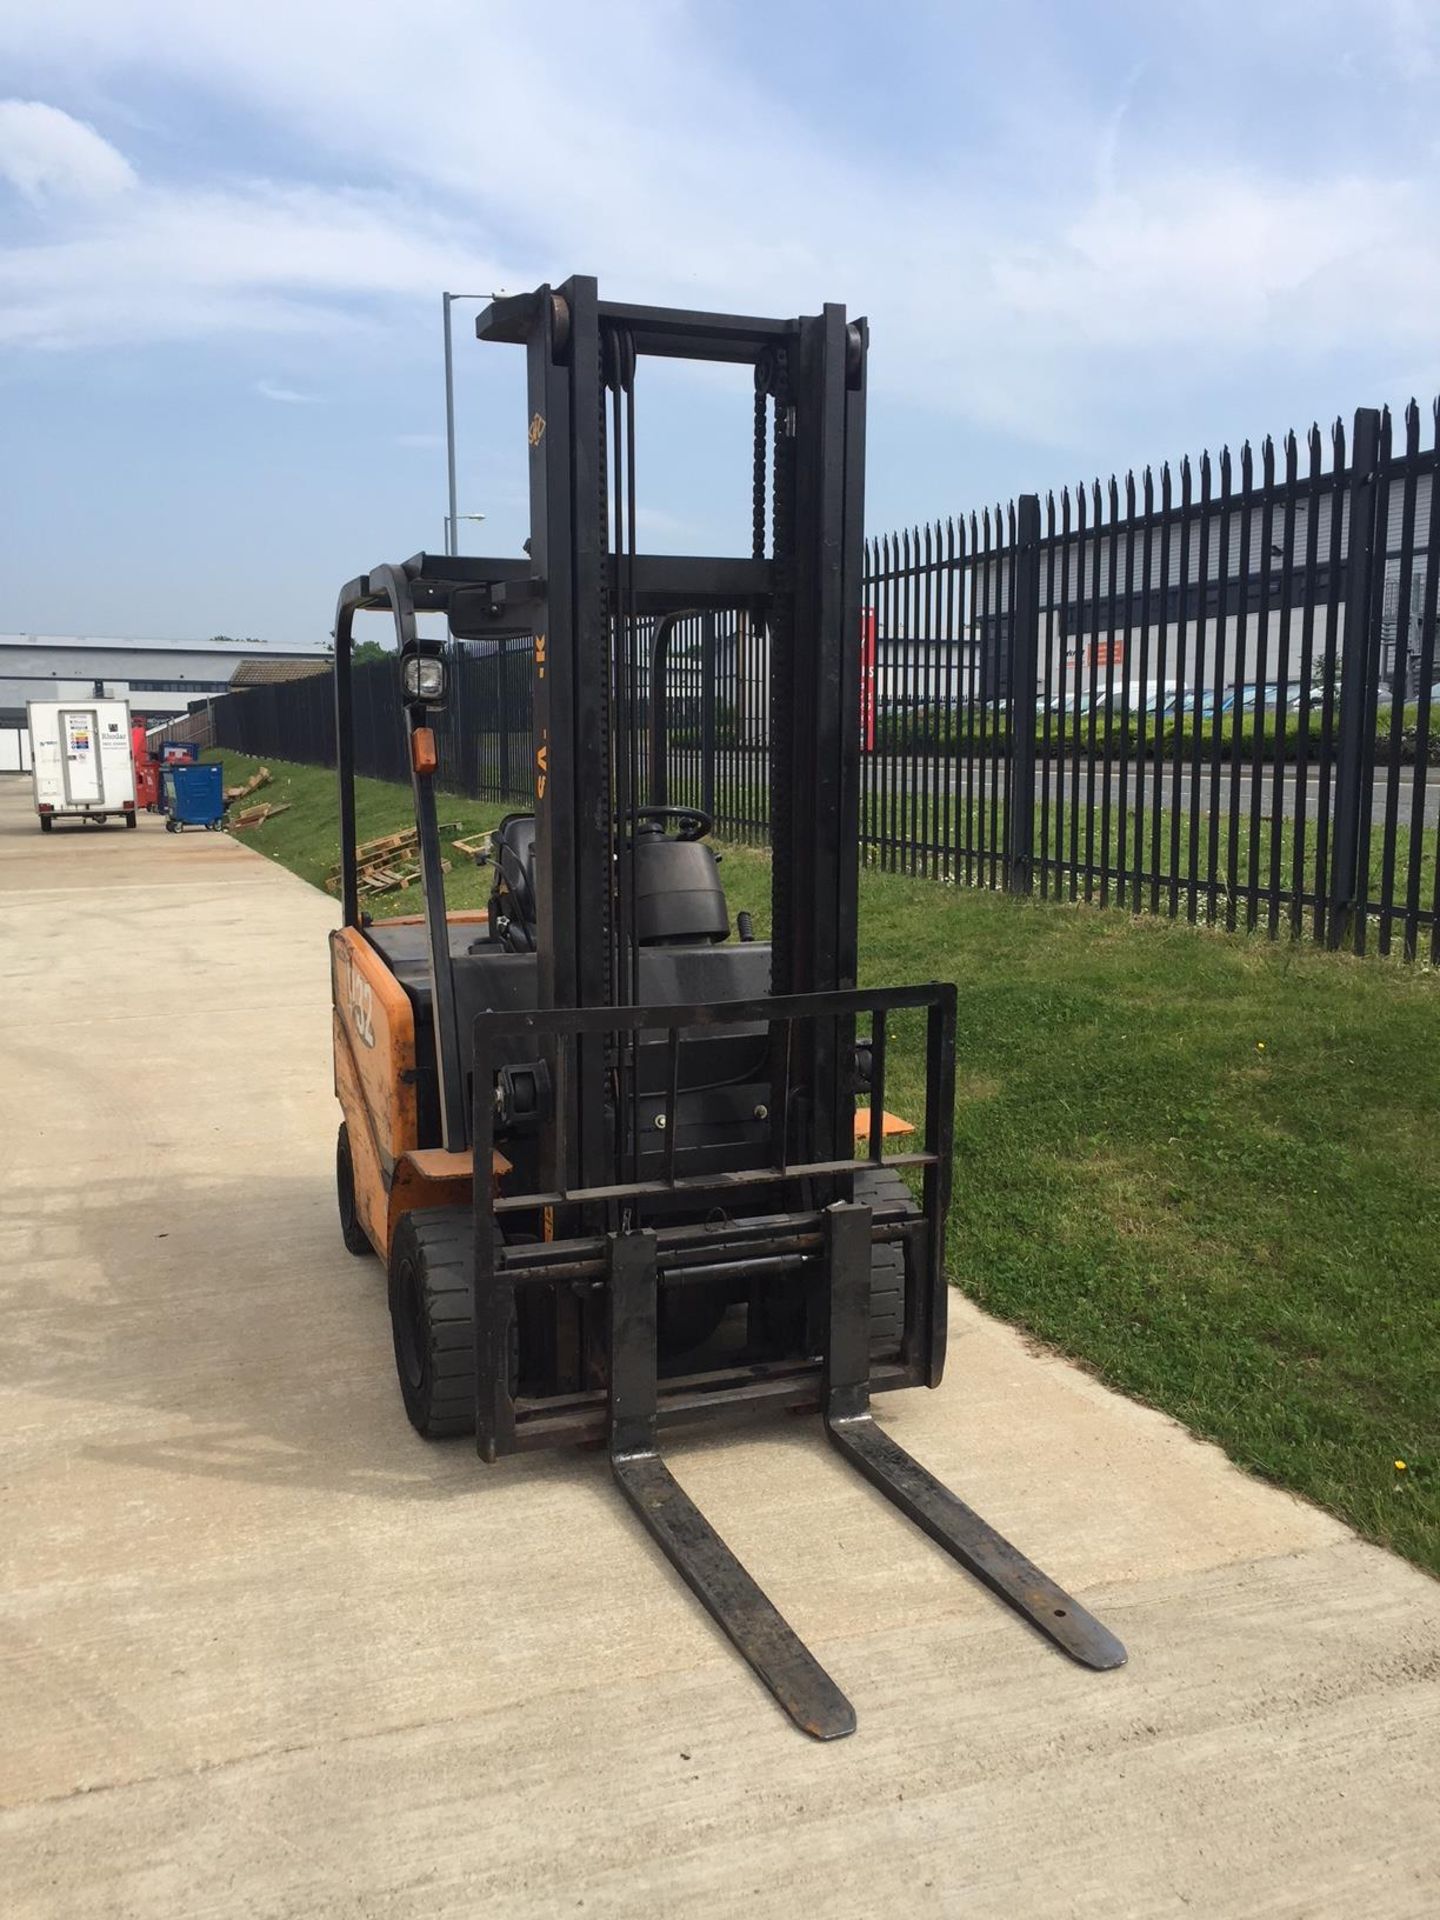 Sam-uk electric counterbalance fork lift truck - Image 4 of 10